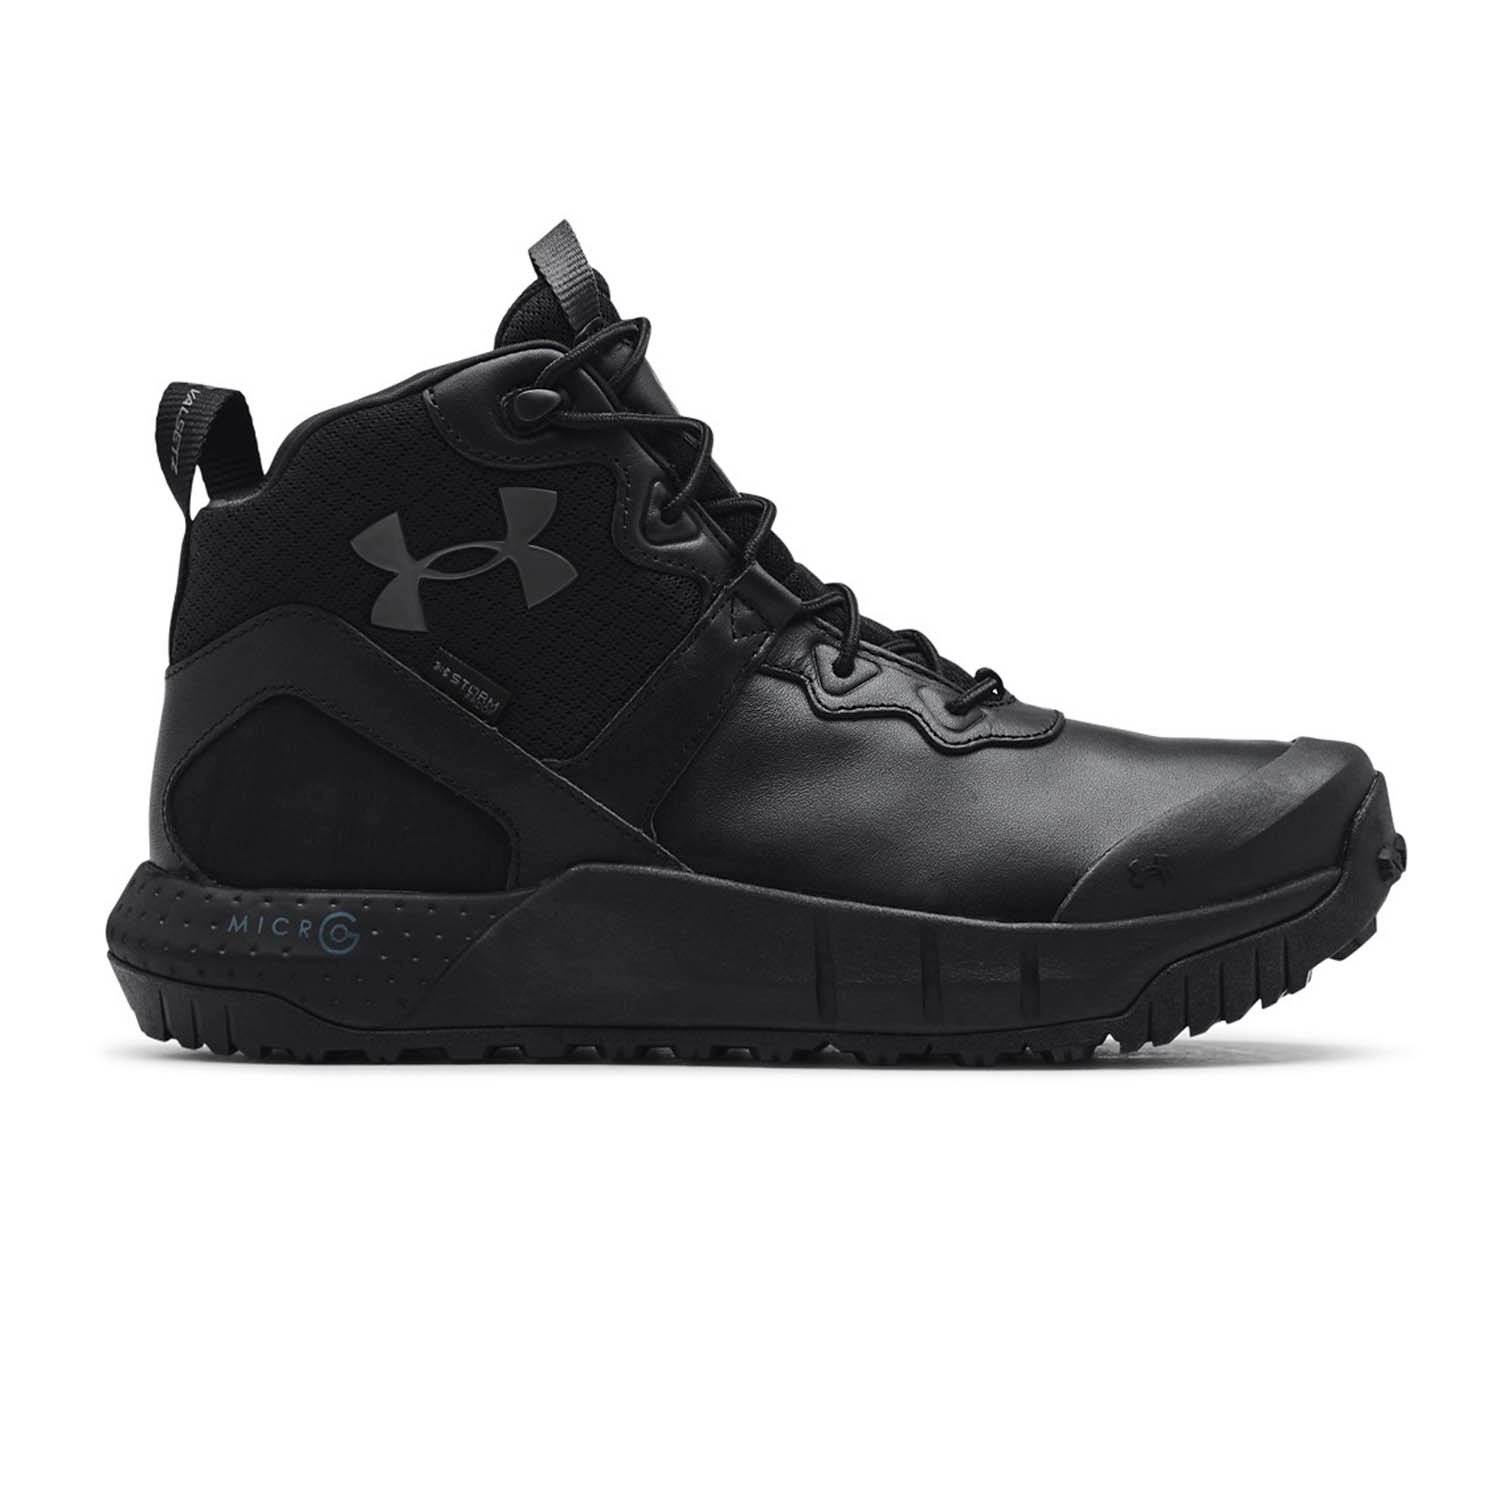 UNDER ARMOUR MICRO G VALSETZ MID LEATHER WATERPROOF TAC BOOT